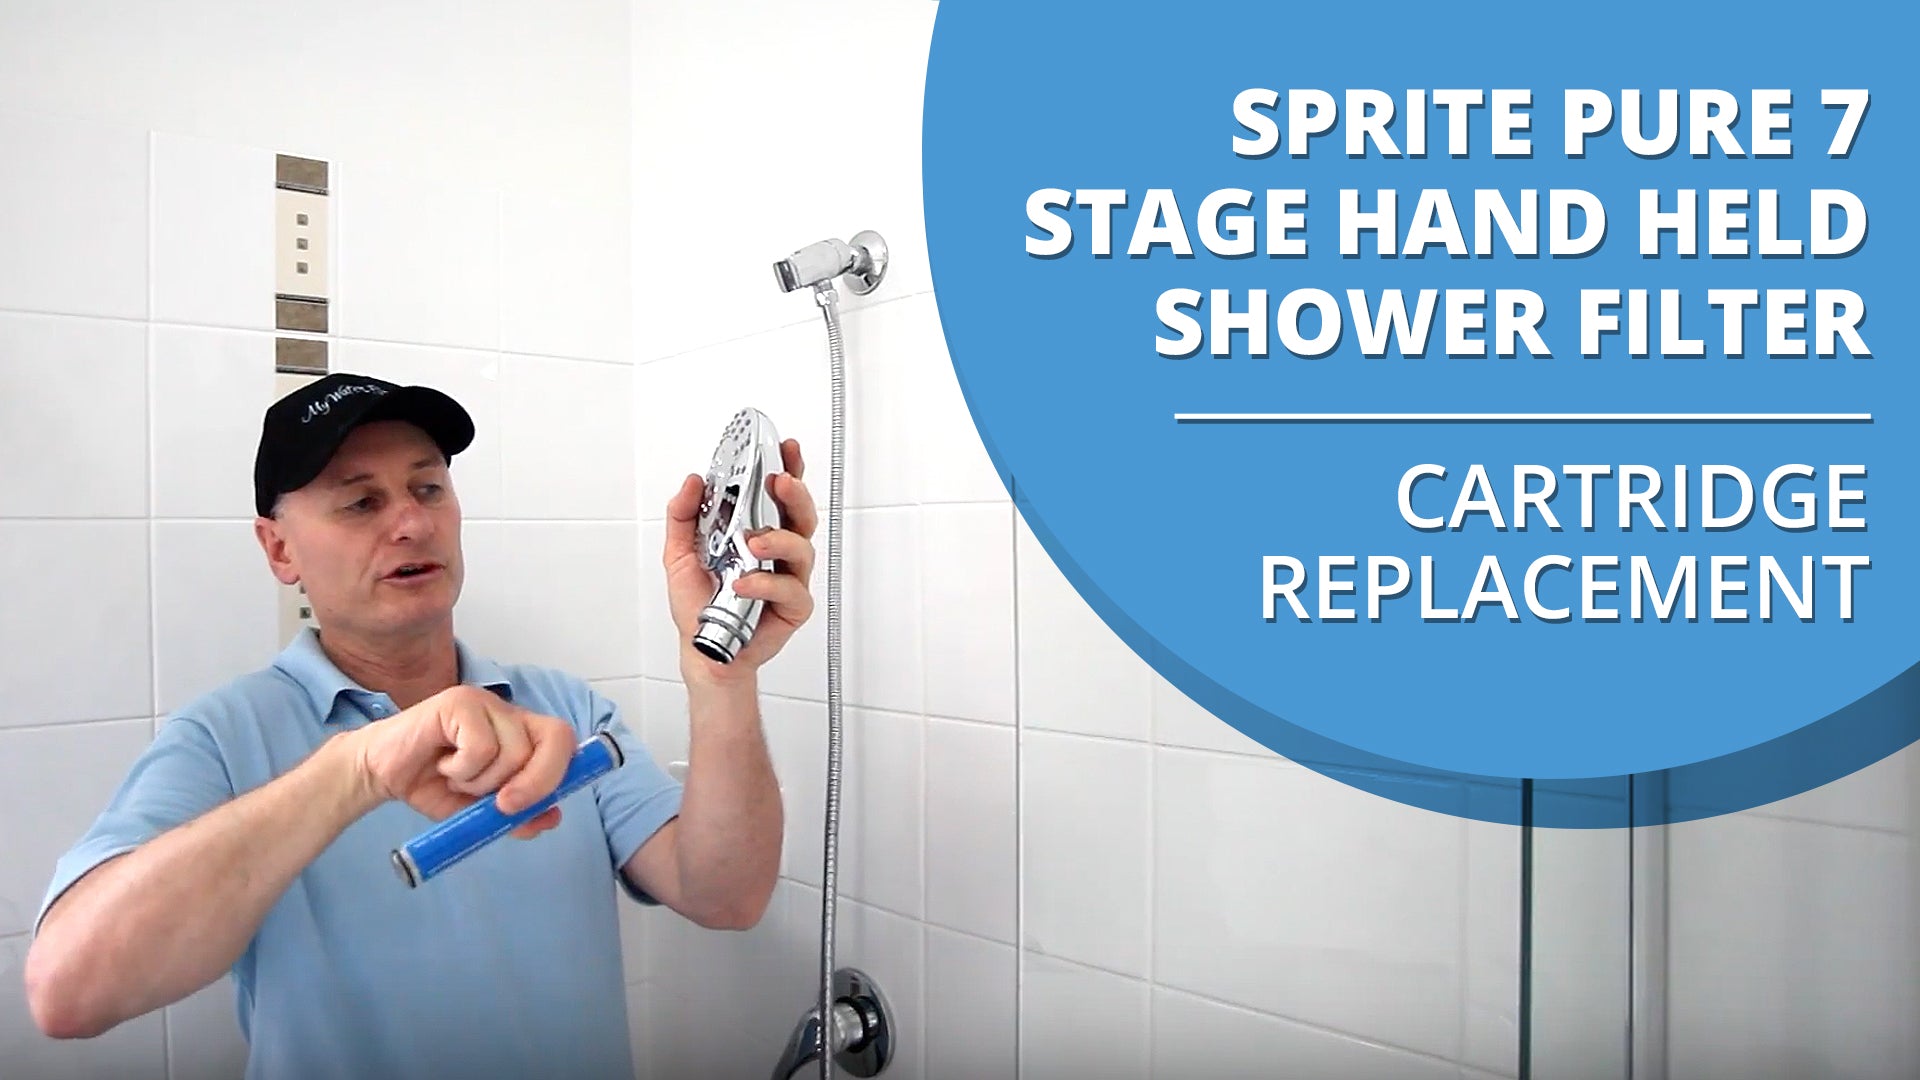 How to replace the cartridge in your Sprite Shower Pure 7 Stage Hand Held Shower Filter